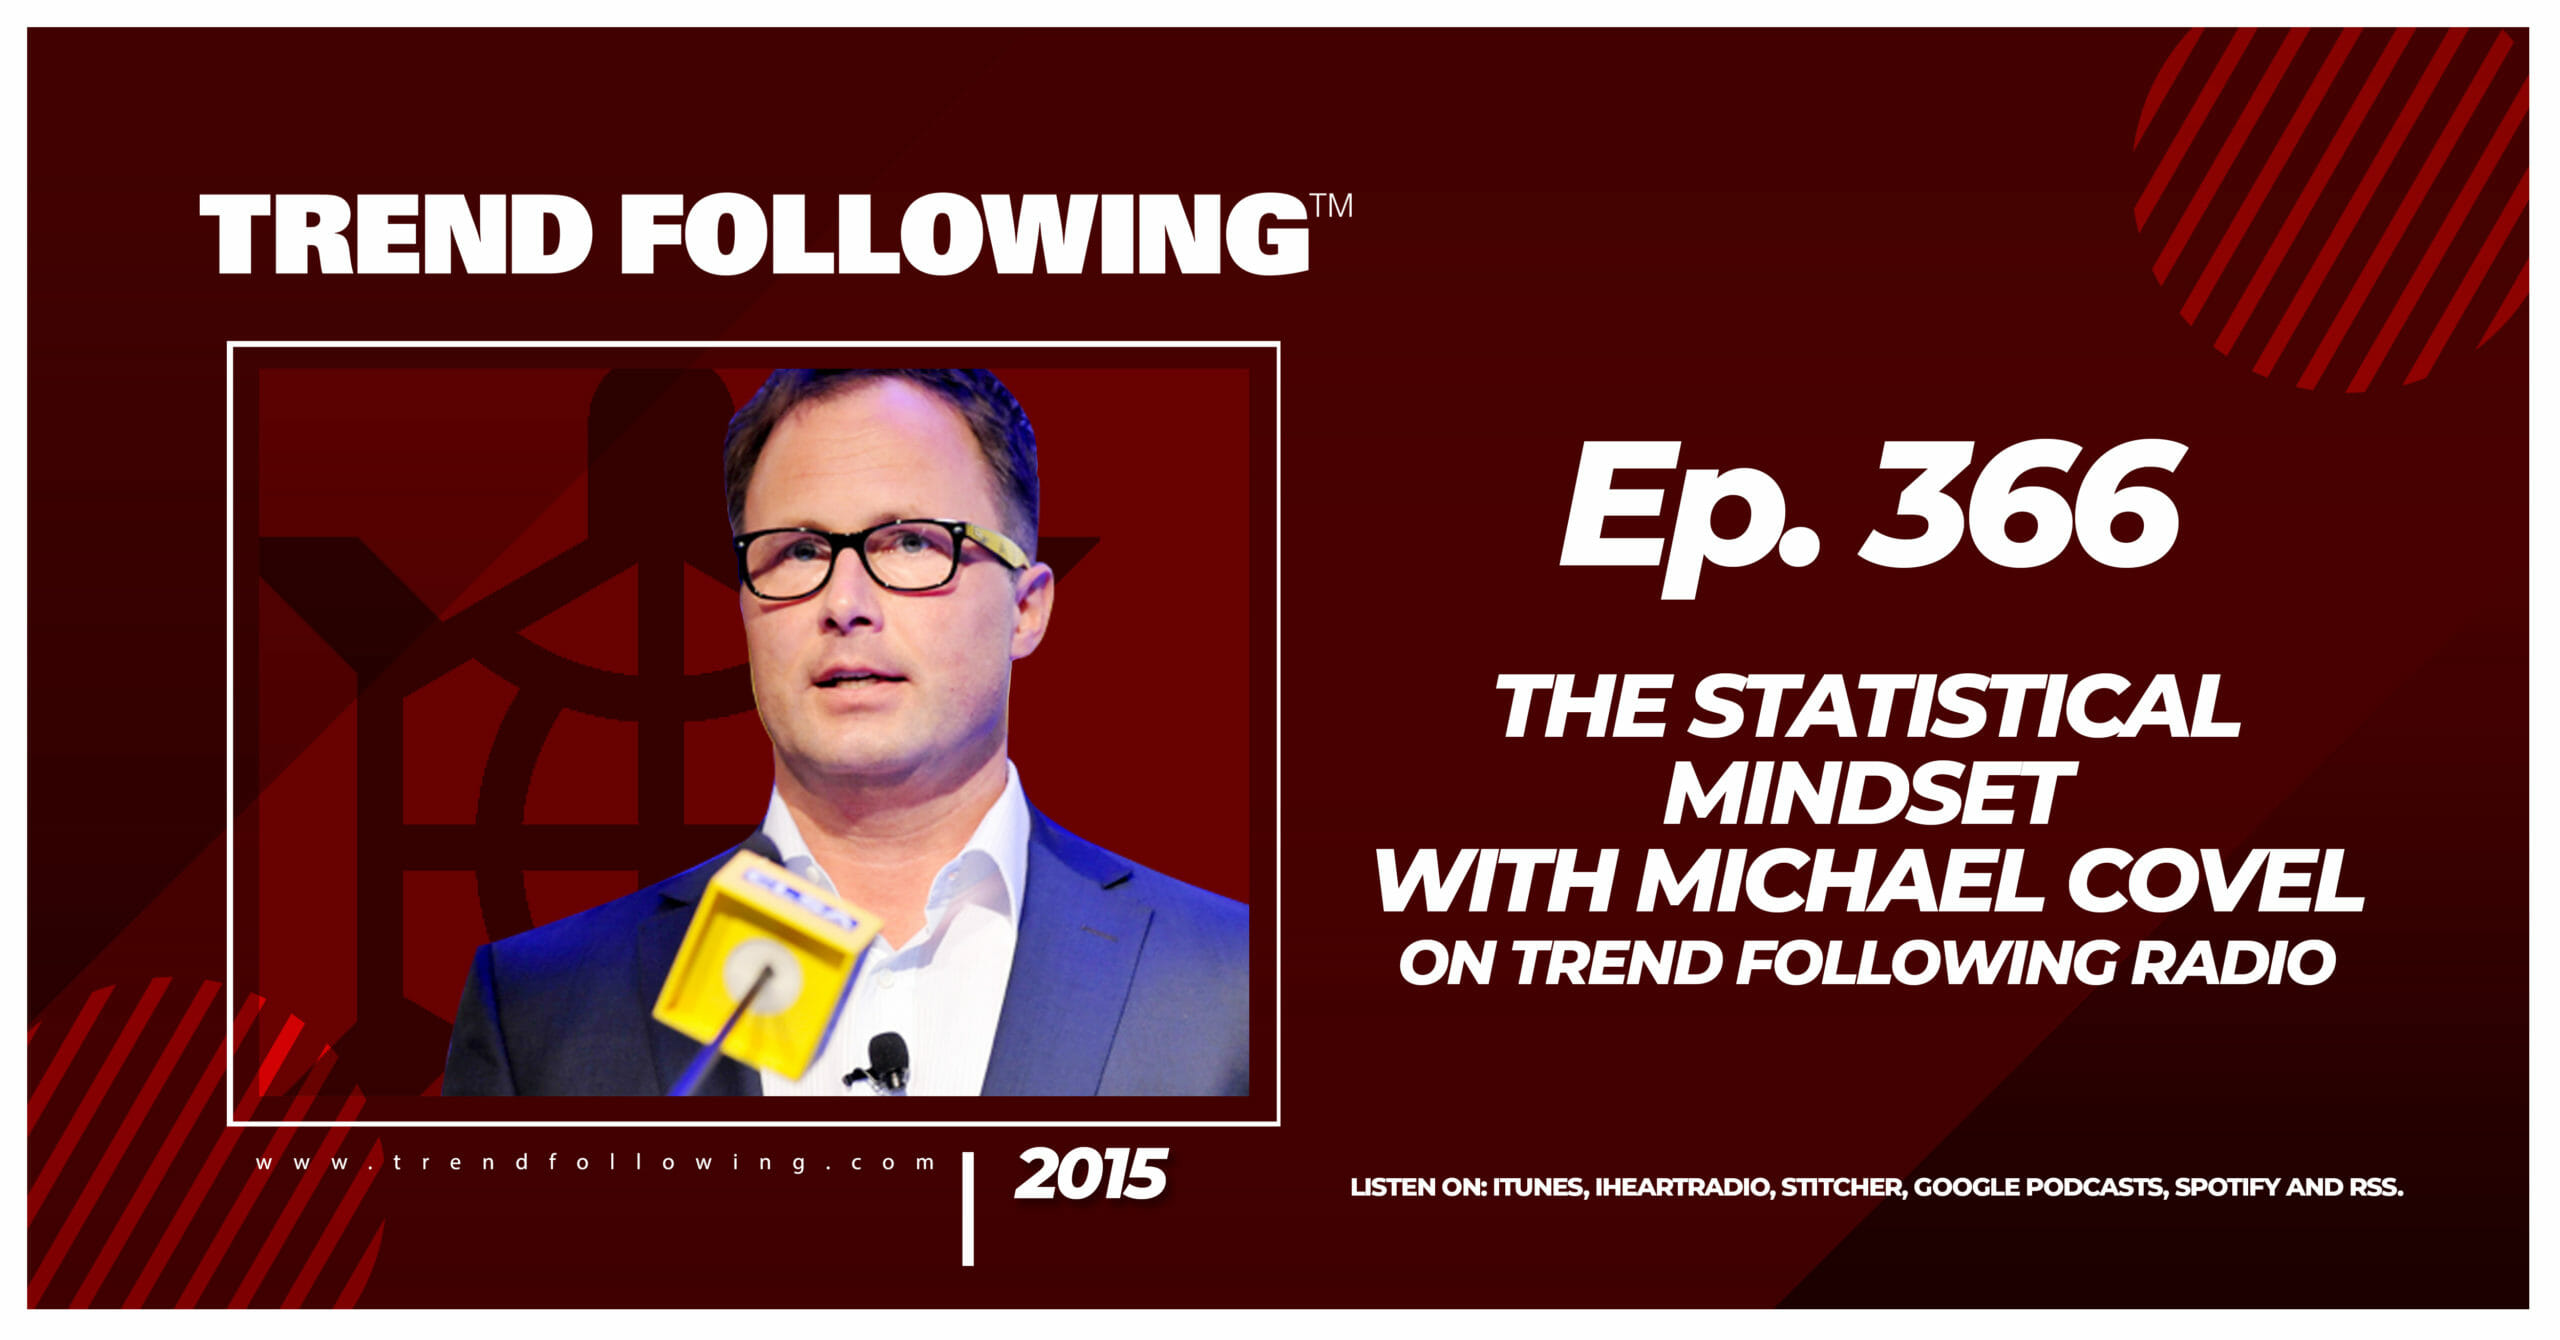 The Statistical Mindset with Michael Covel on Trend Following Radio